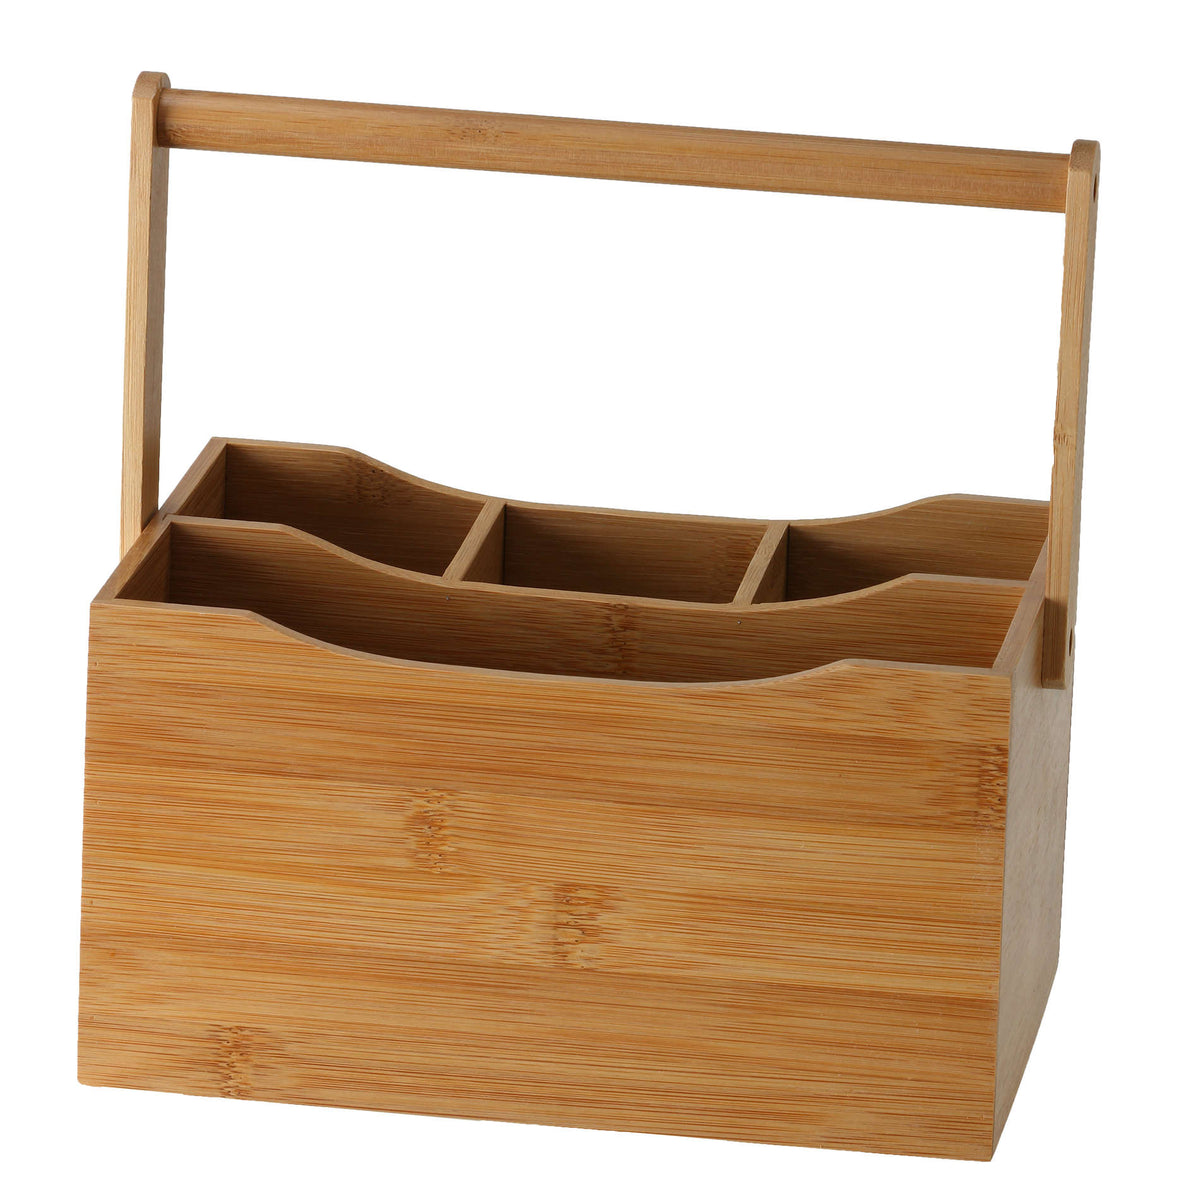 Cortesi Home Kira Natural Bamboo Cutlery Caddy Tabletop Holder with Handle and 4 Compartments